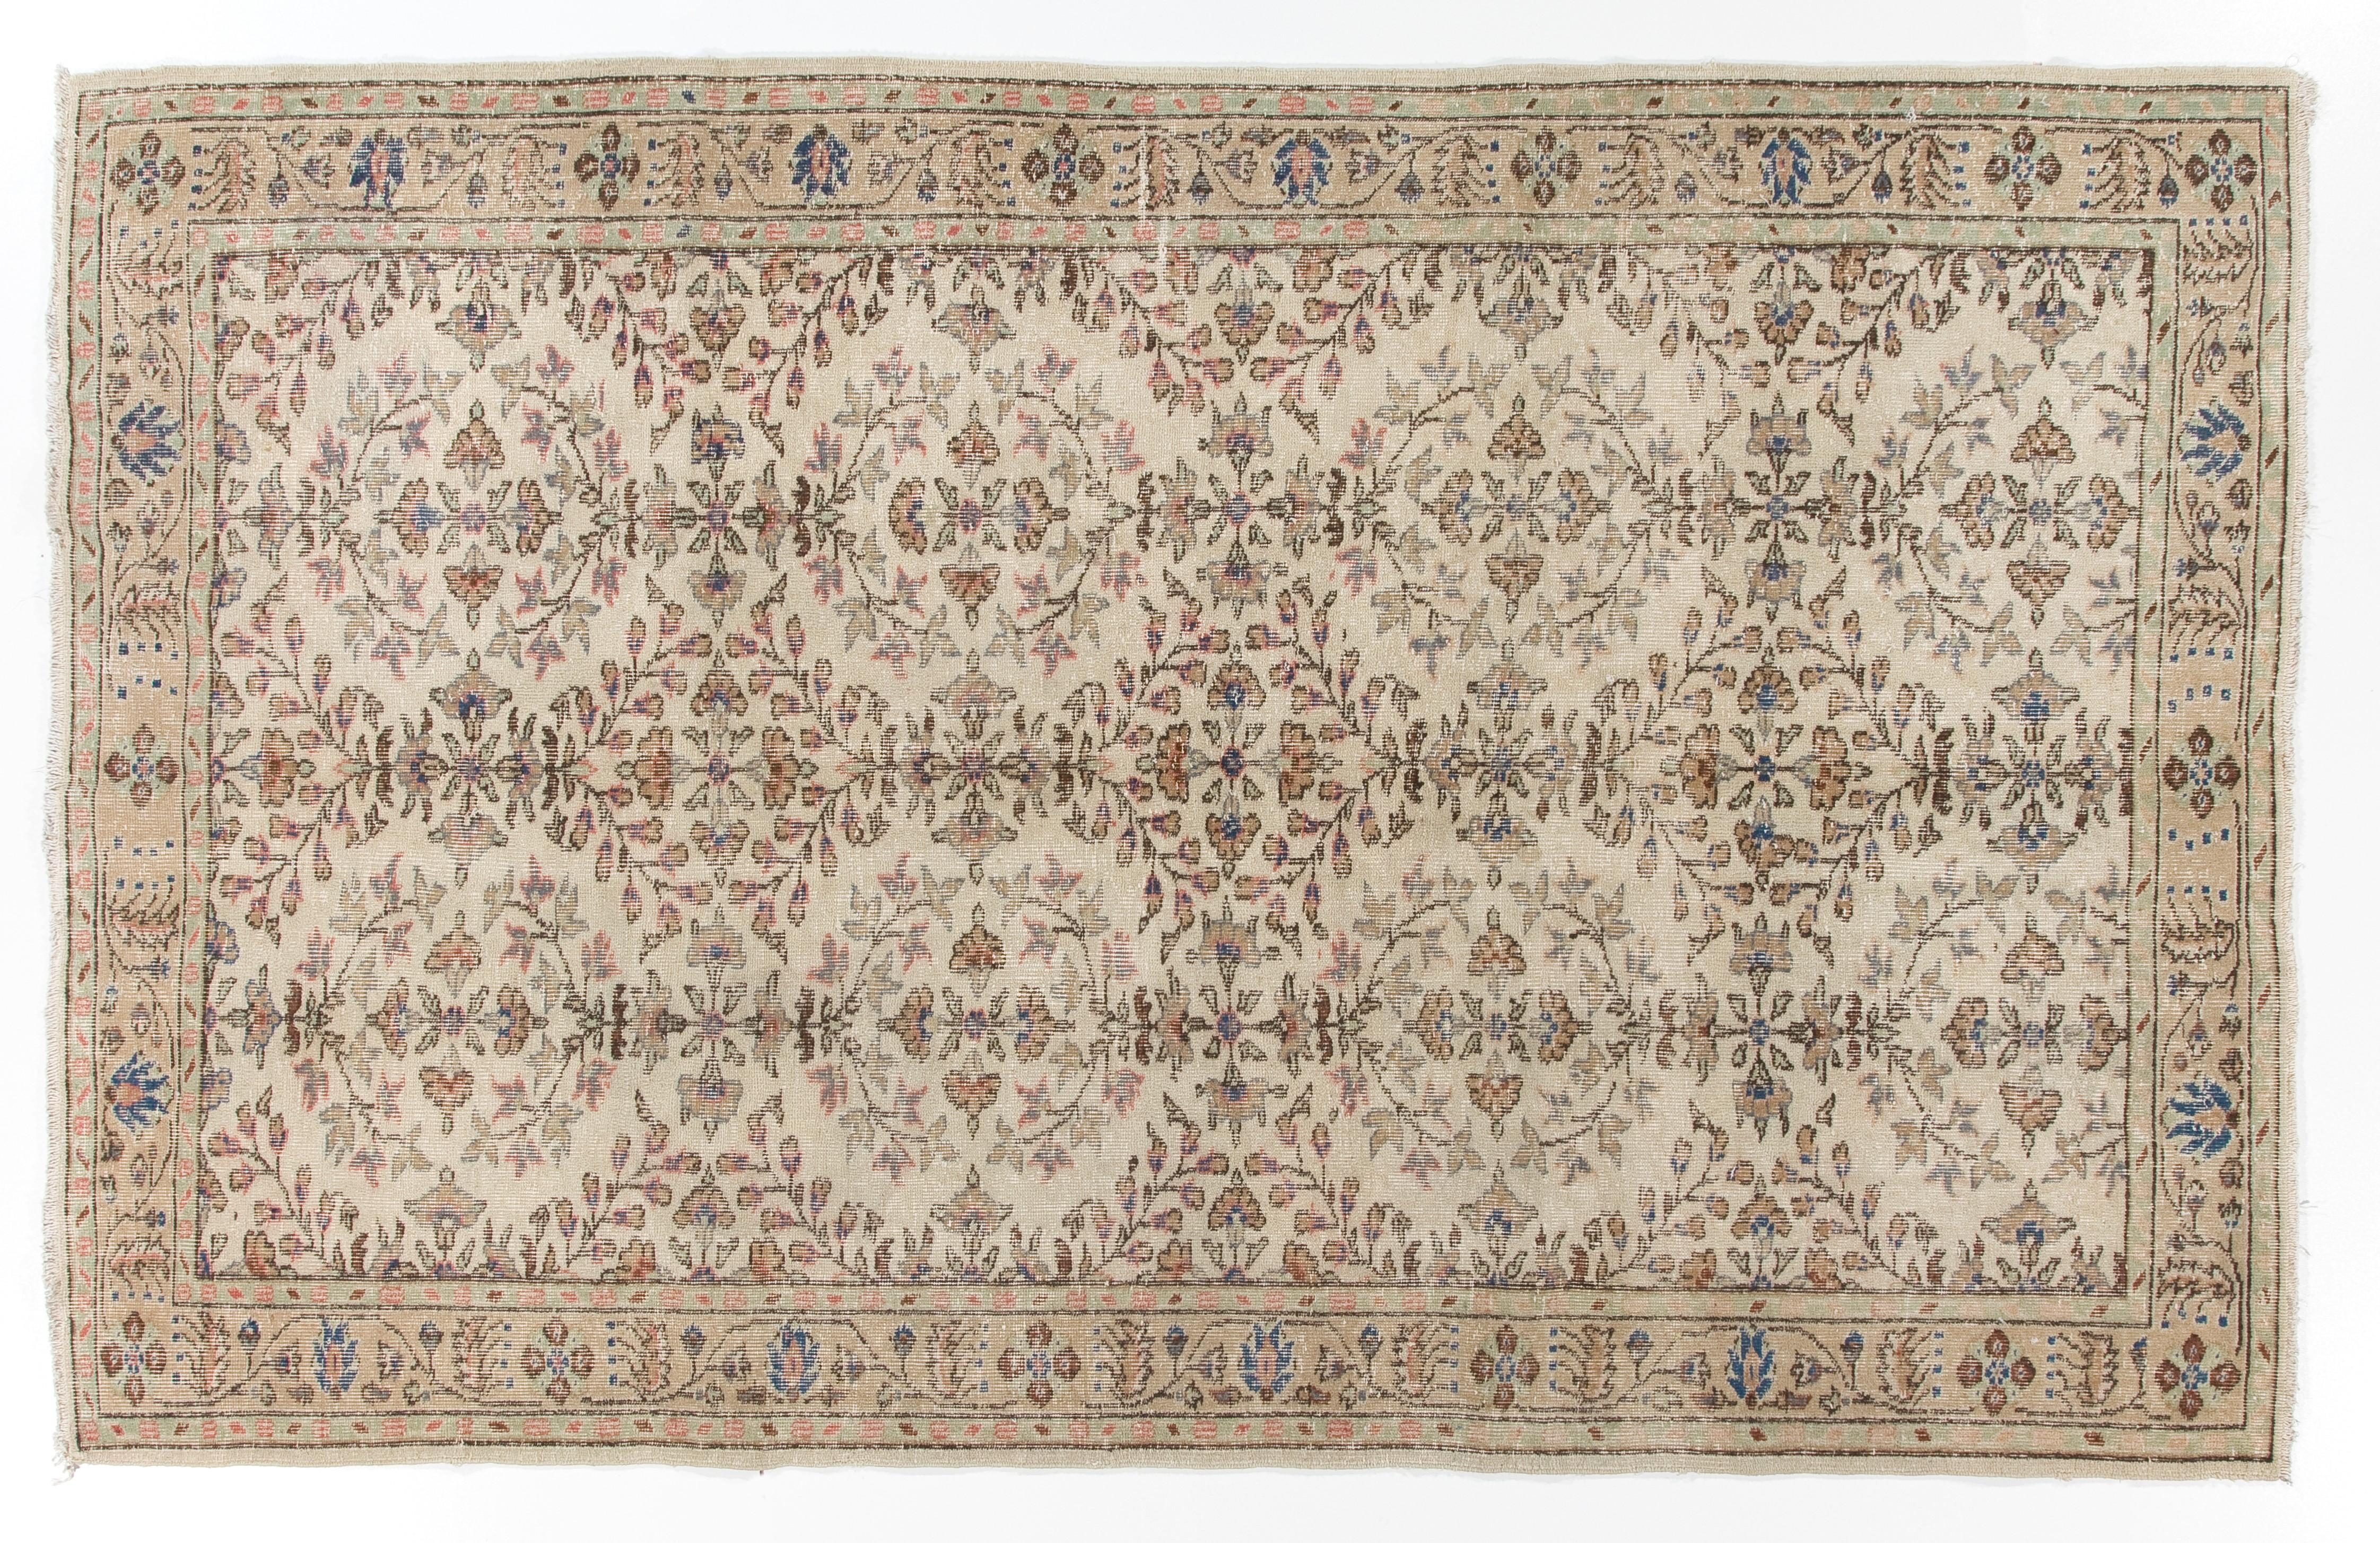 6x9 Ft Vintage Oushak Area Rug in Soft, Muted Colors, Wool Hand Knotted Carpet In Good Condition For Sale In Philadelphia, PA